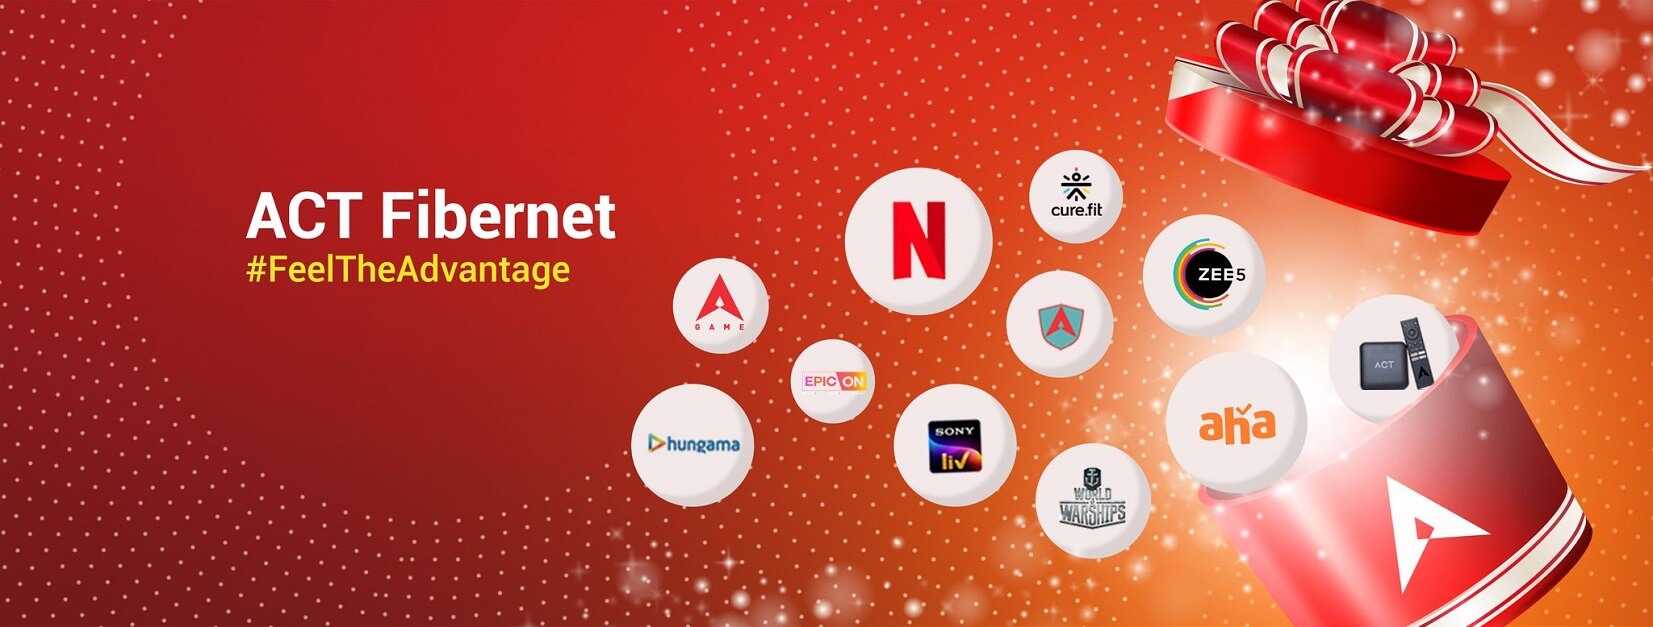 How To Get Zee5 With ACT Fibernet Internet Connection In Hyderabad?